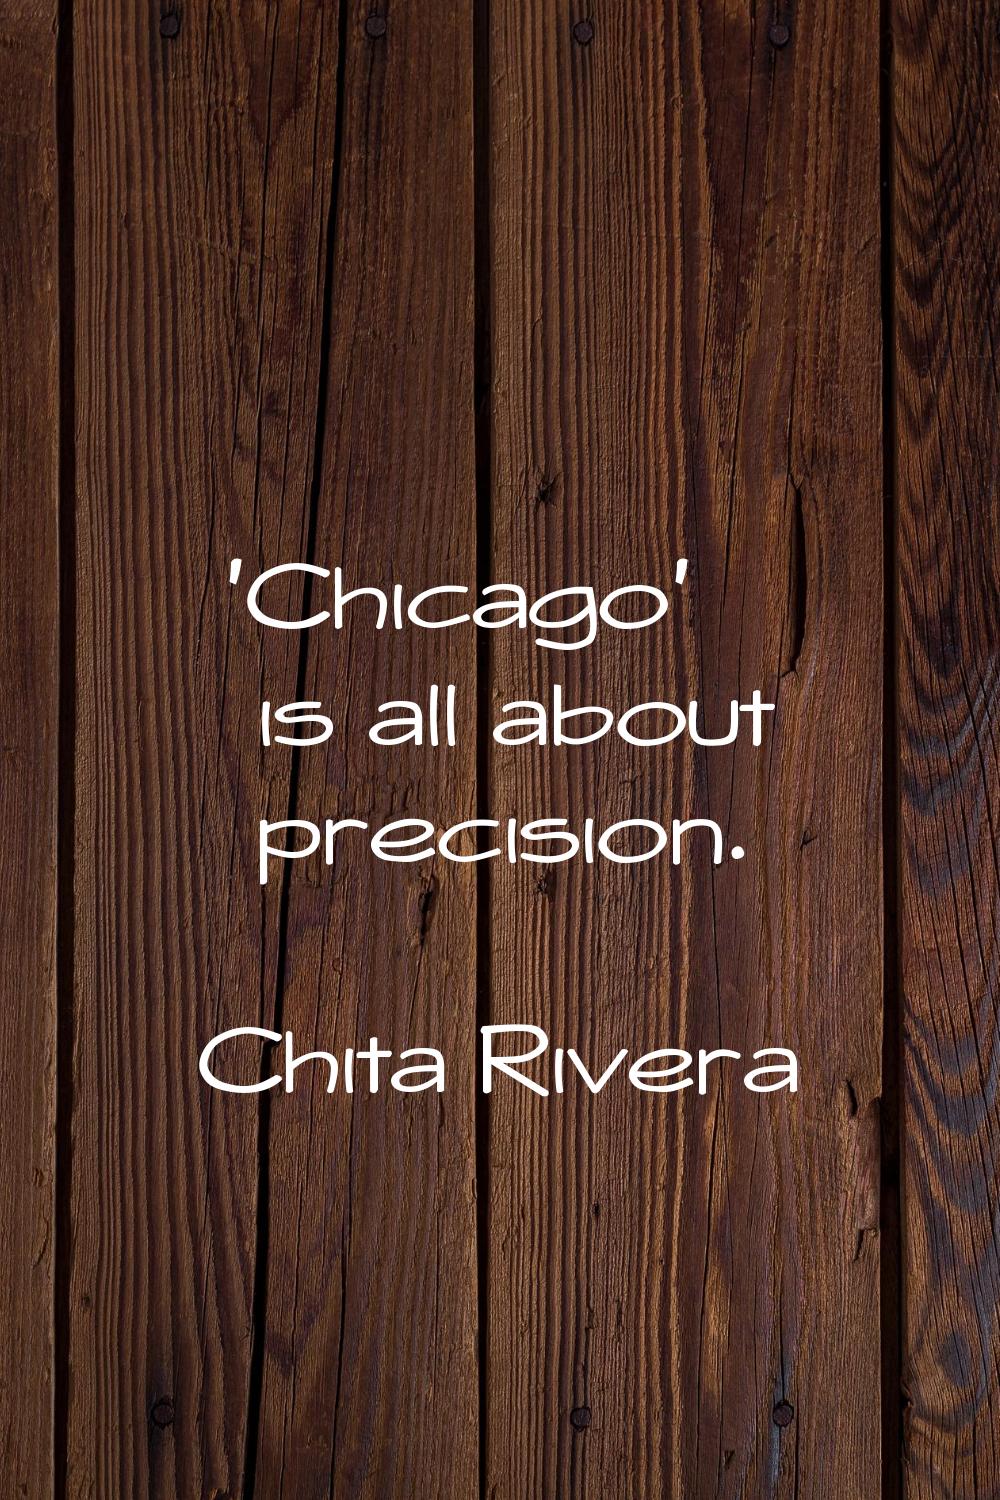 'Chicago' is all about precision.